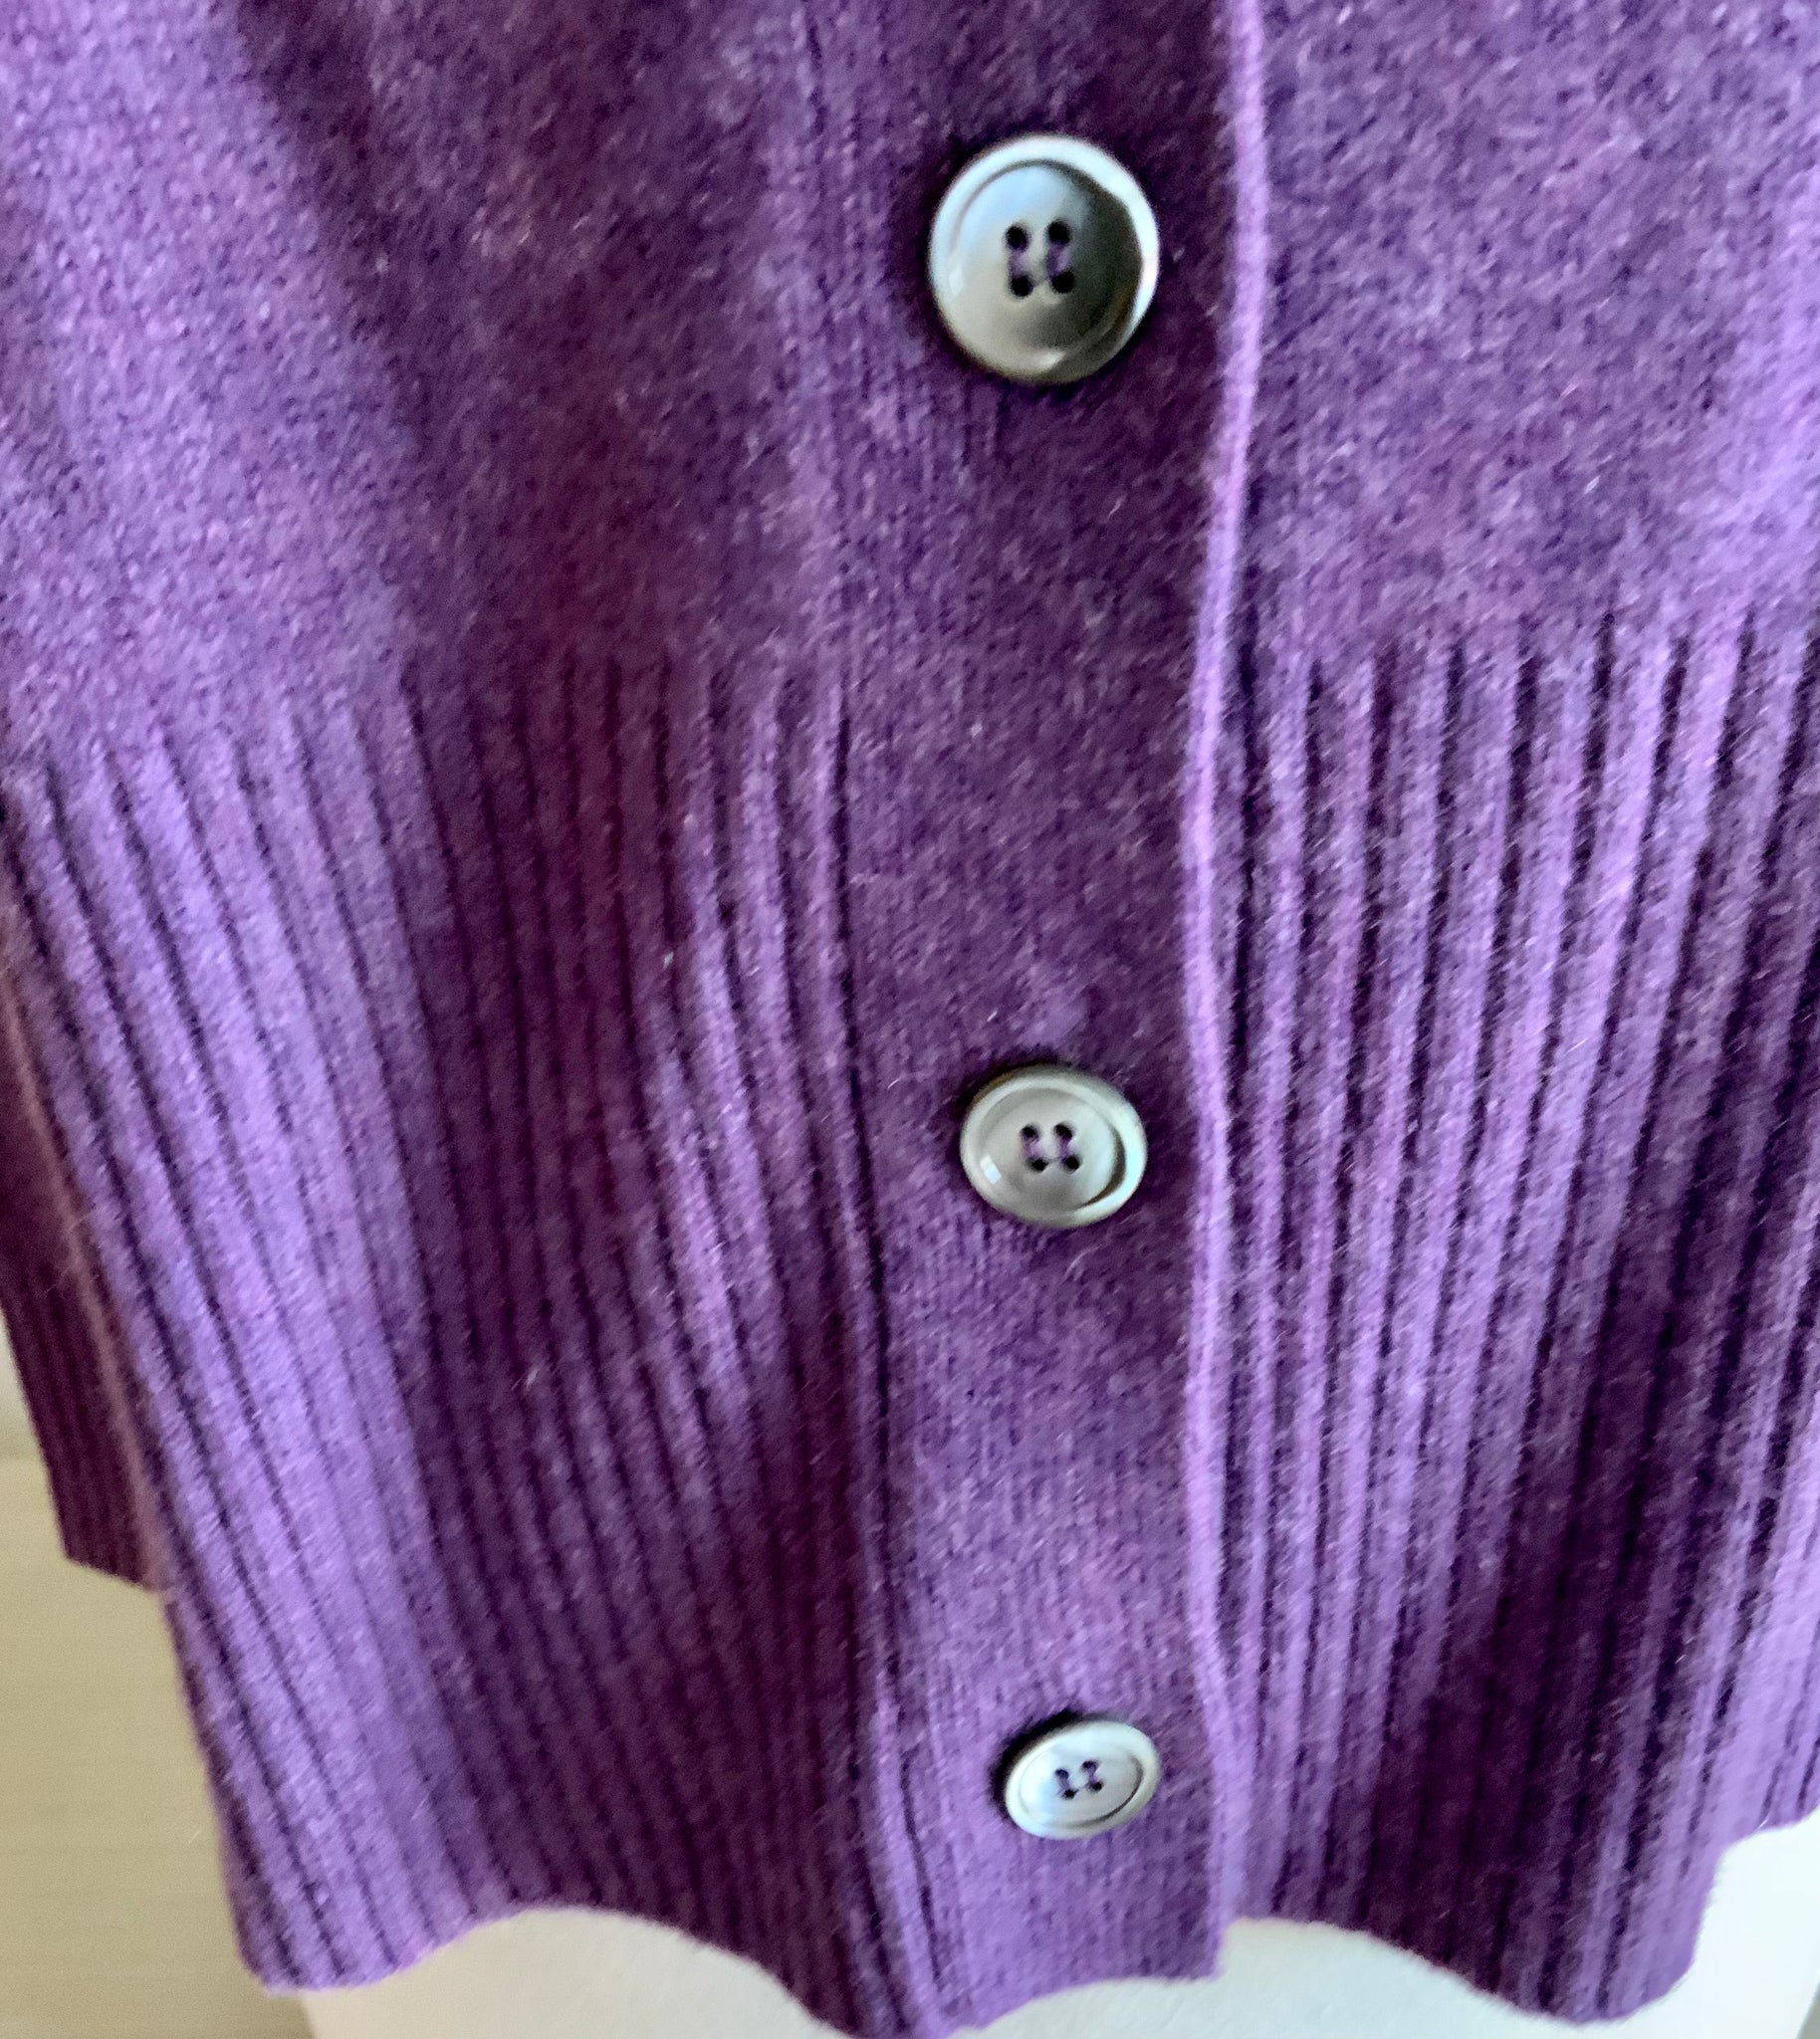 Cashmere Knitted Cardigan